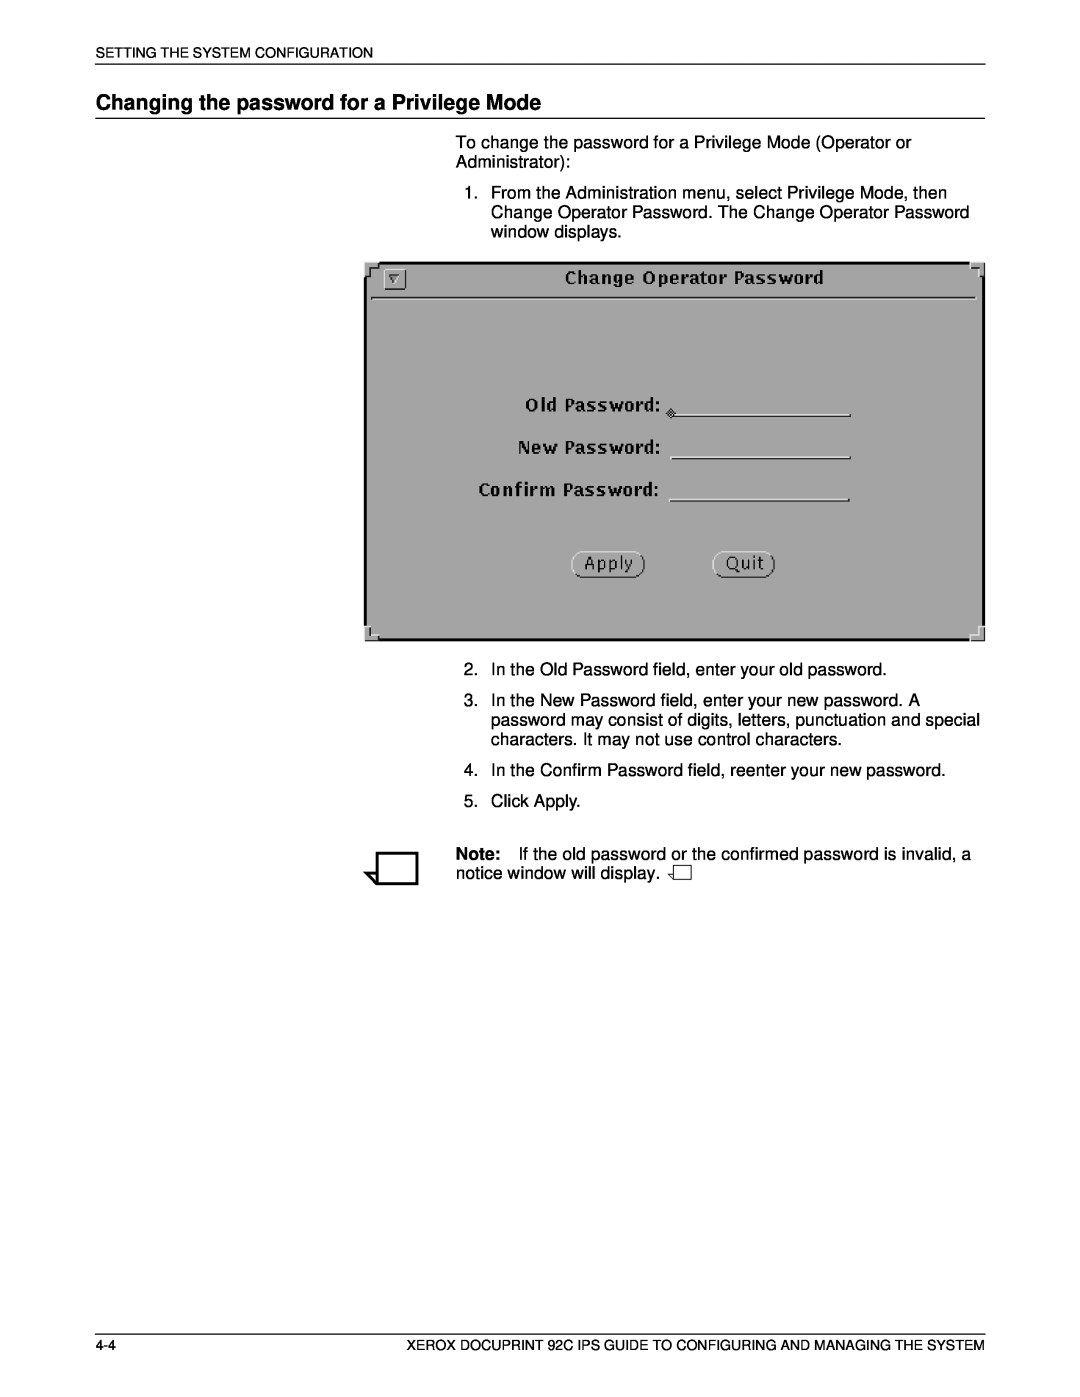 Xerox 92C IPS manual Changing the password for a Privilege Mode 